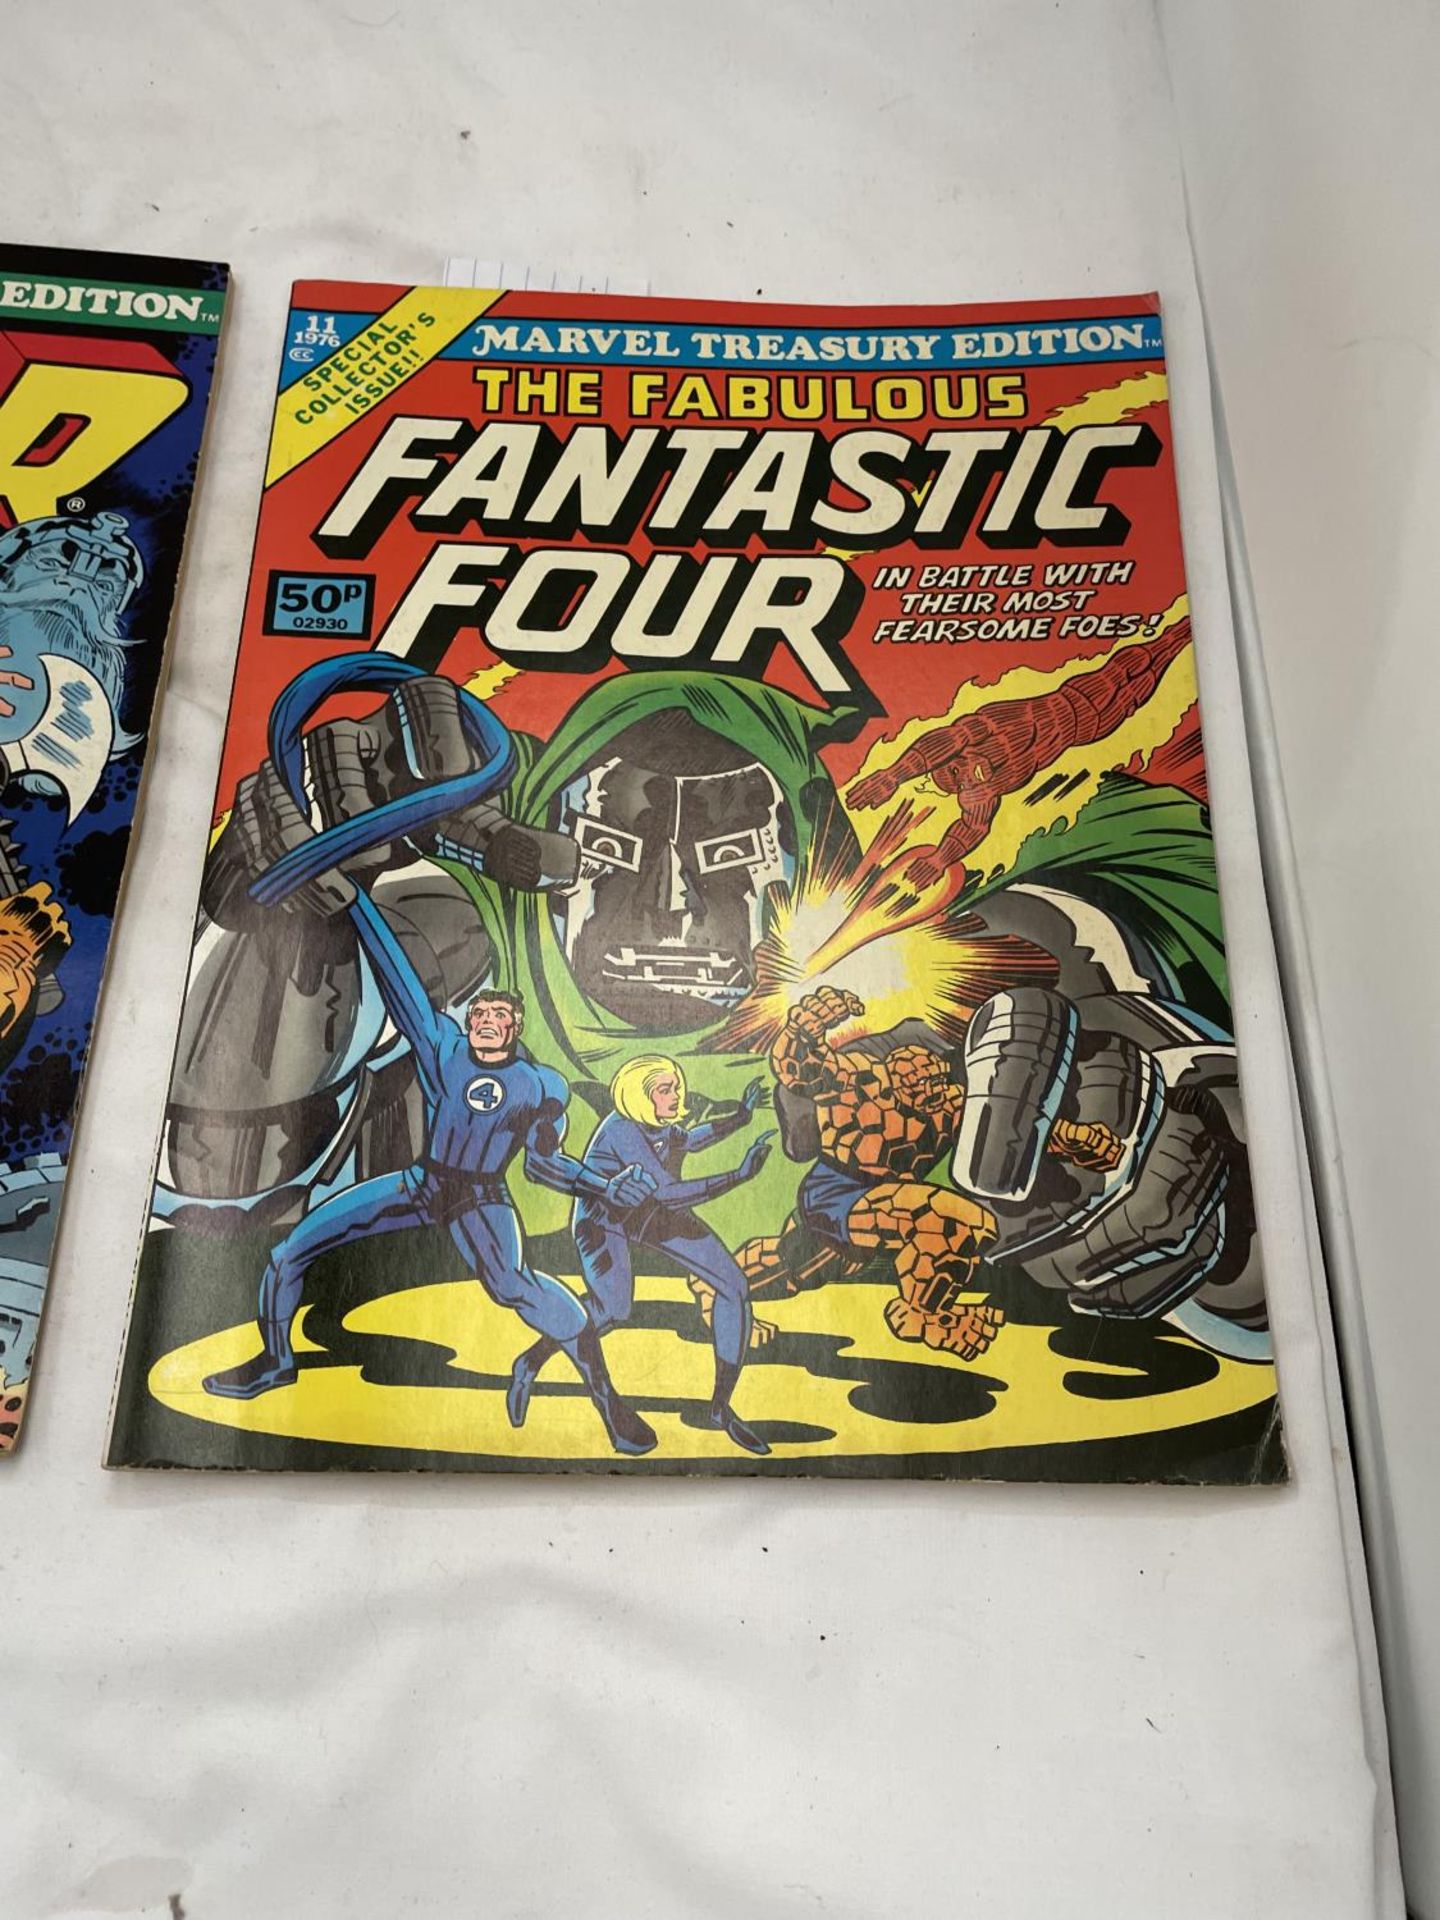 TWO MARVEL TREASURY EDITION COMICS FROM 1976 - NO 10 'THE MIGHTY THOR' AND NO 11 'THE FANTASTIC - Image 6 of 6